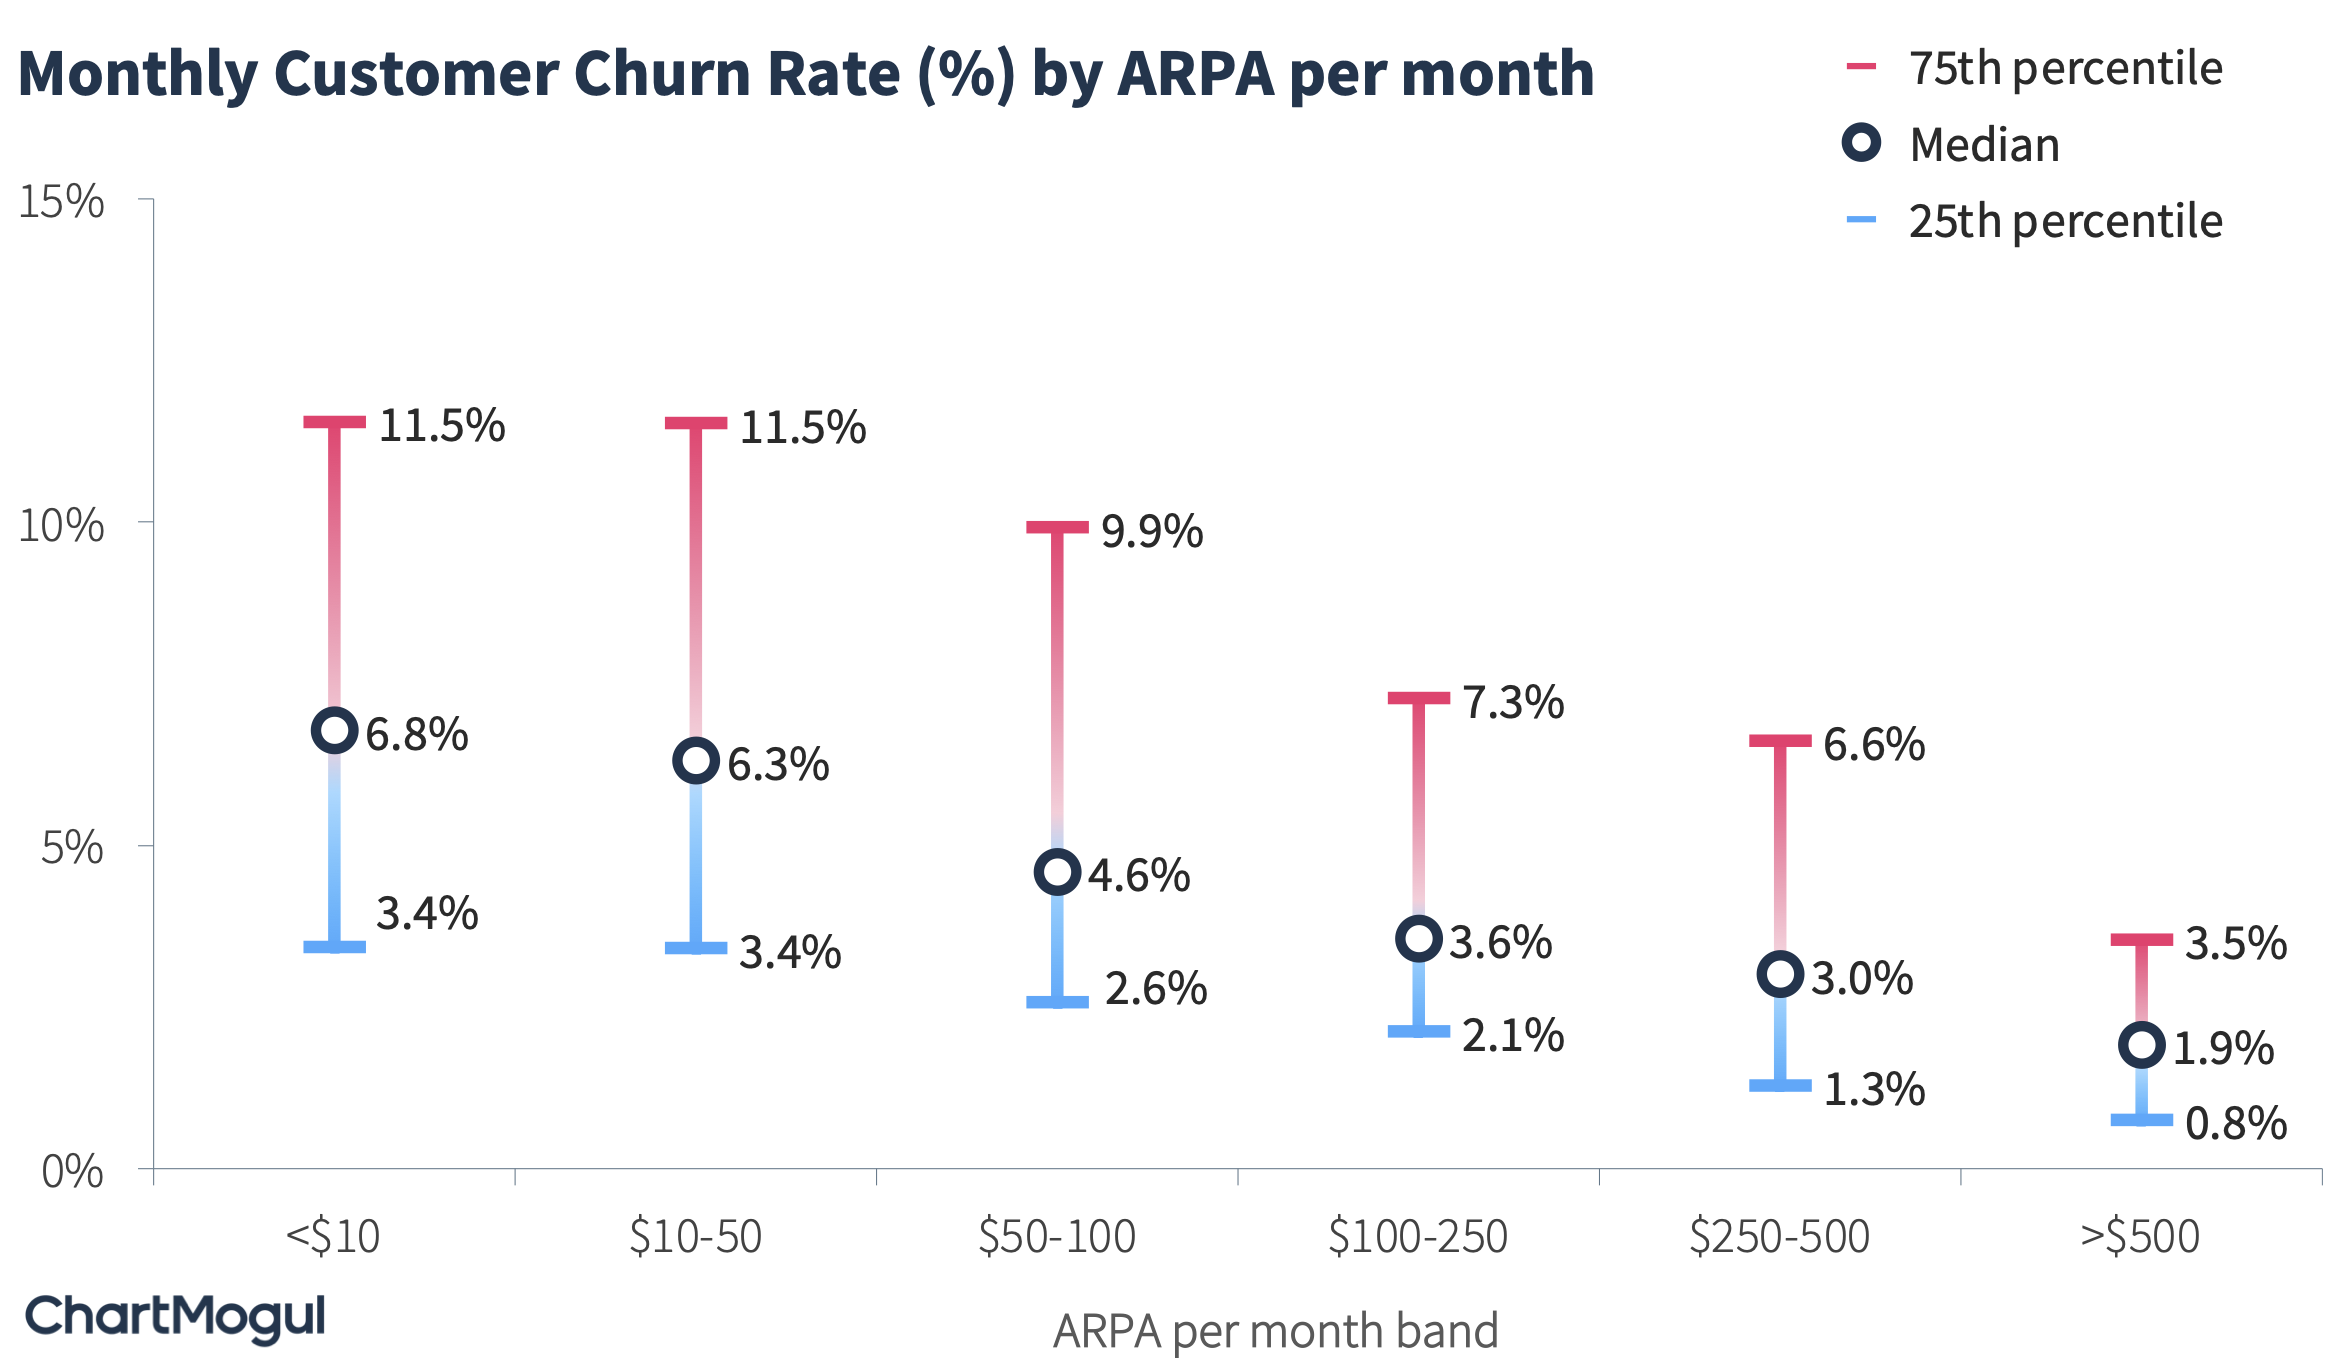 Percentiles of Monthly Customer Churn Rate by ARPA per month